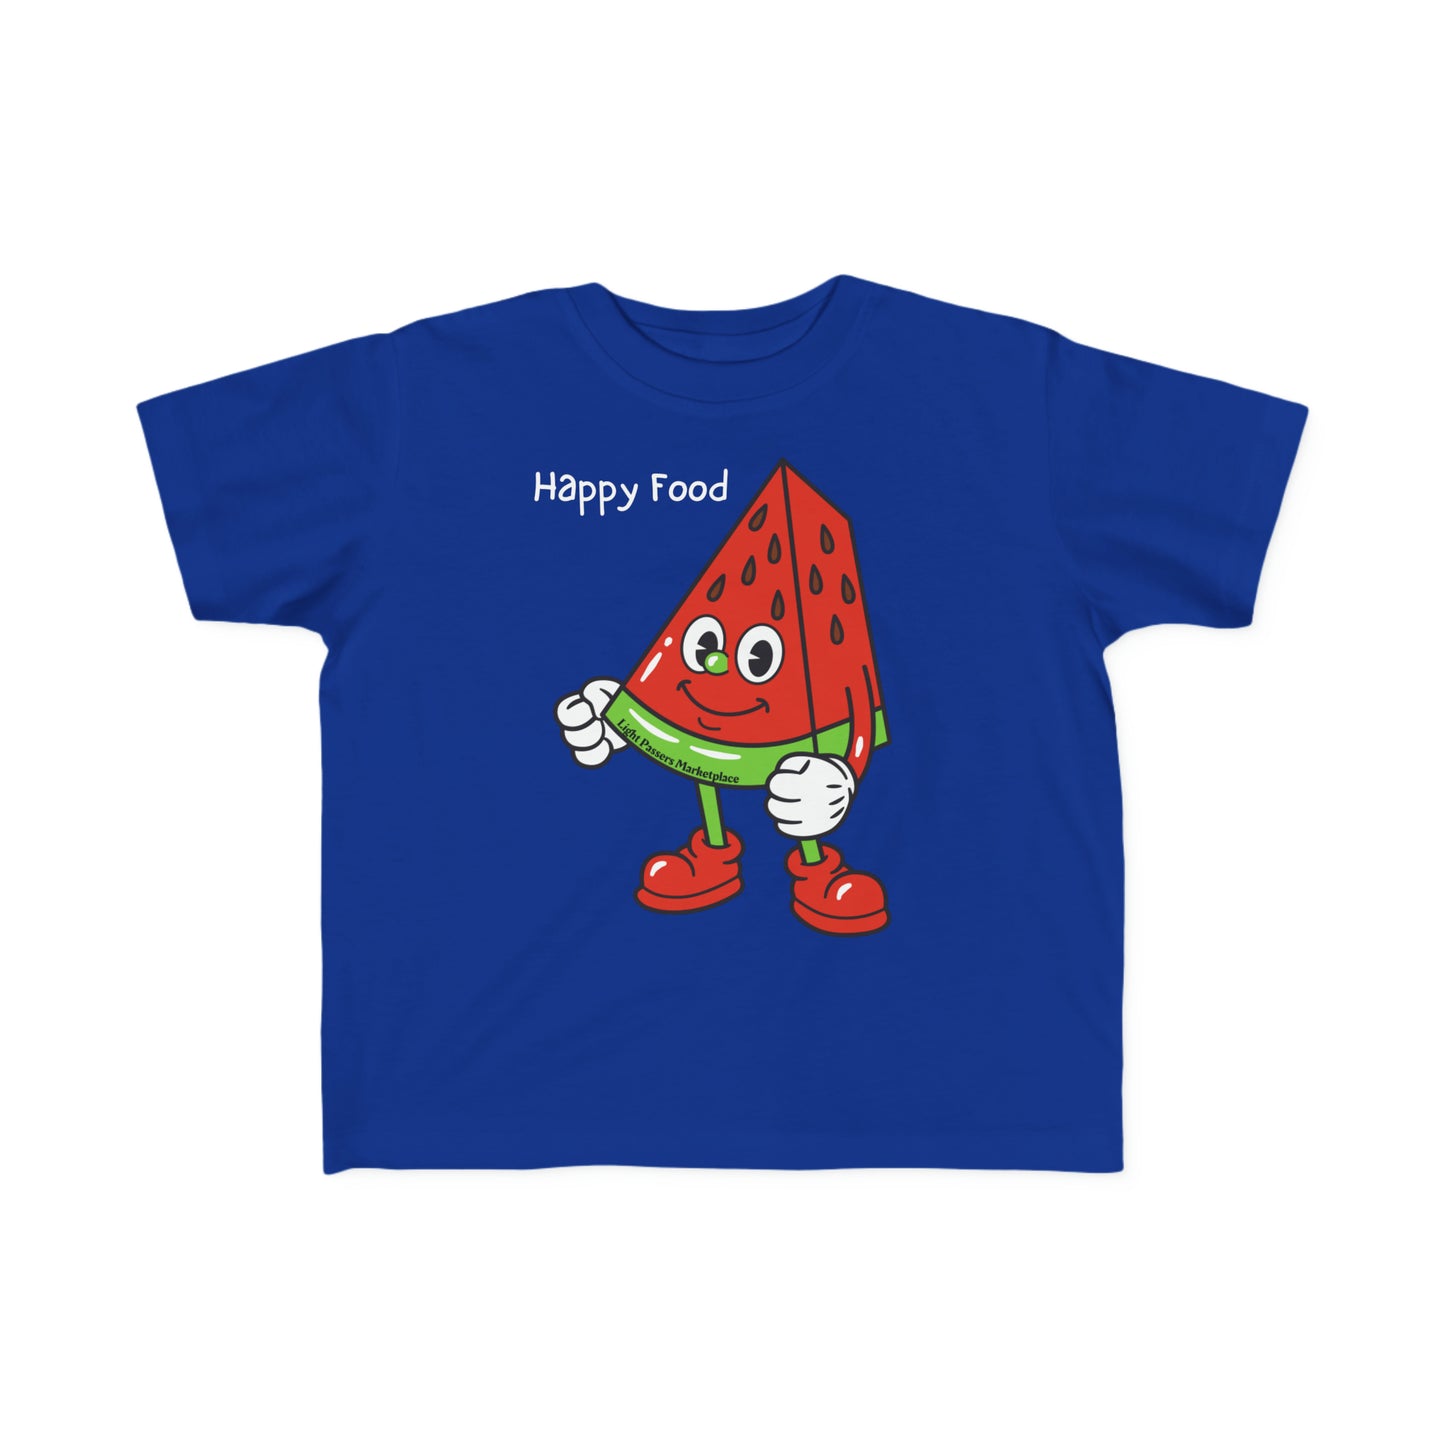 Light Passers Marketplace Happy Food Watermelon Toddler T-shirt, Nutrition